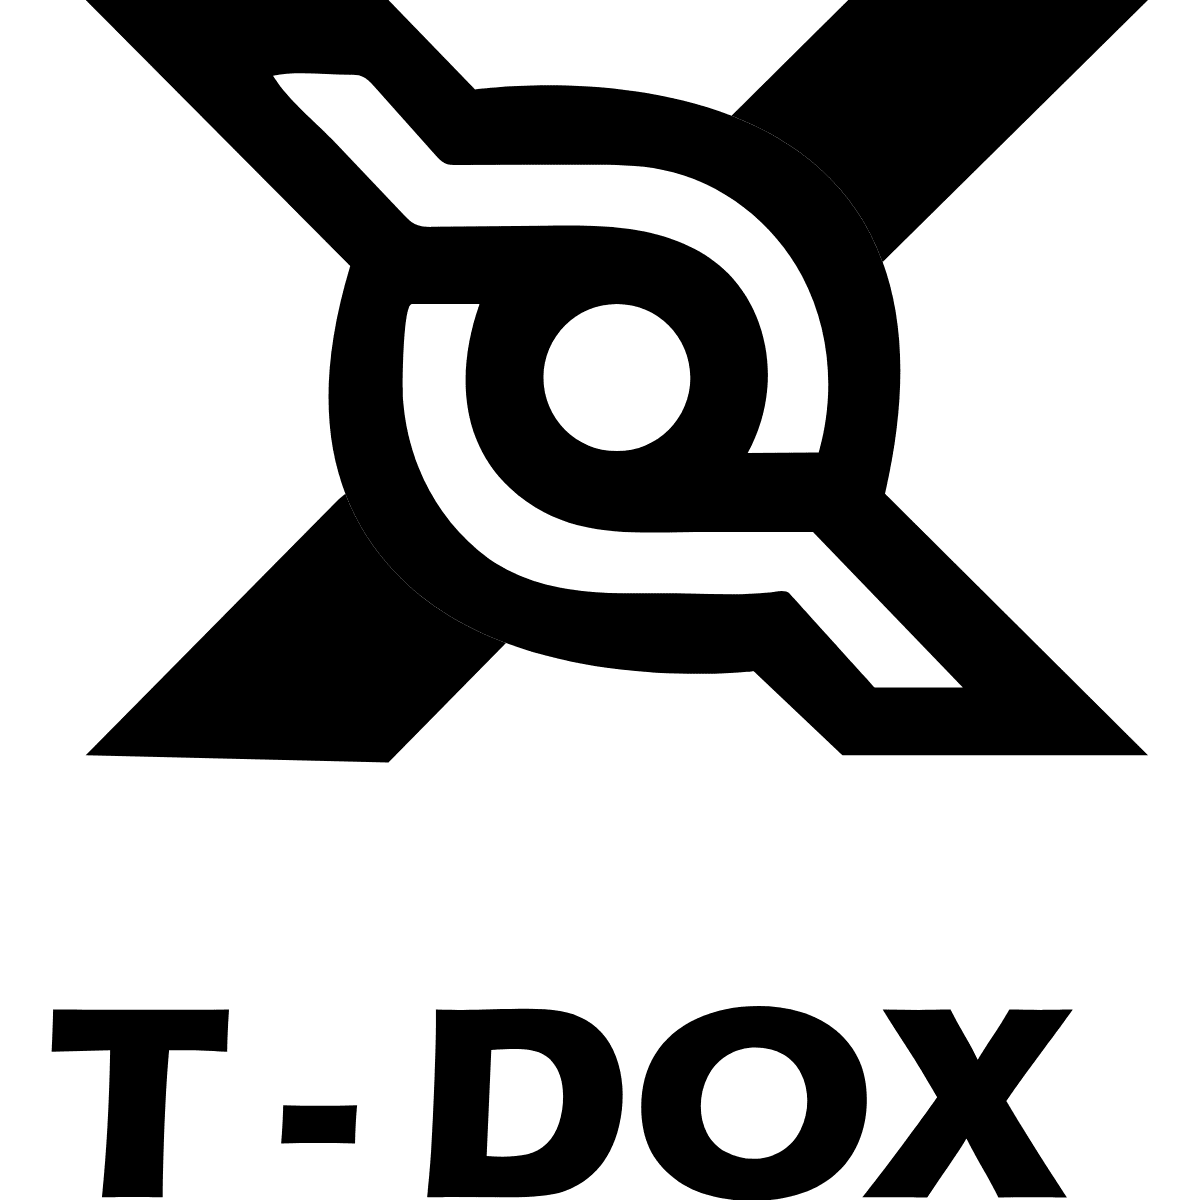 , TDOX Finance emerges as an Autonomous Yield and Liquidity Generation Protocol on Polygon Chain.